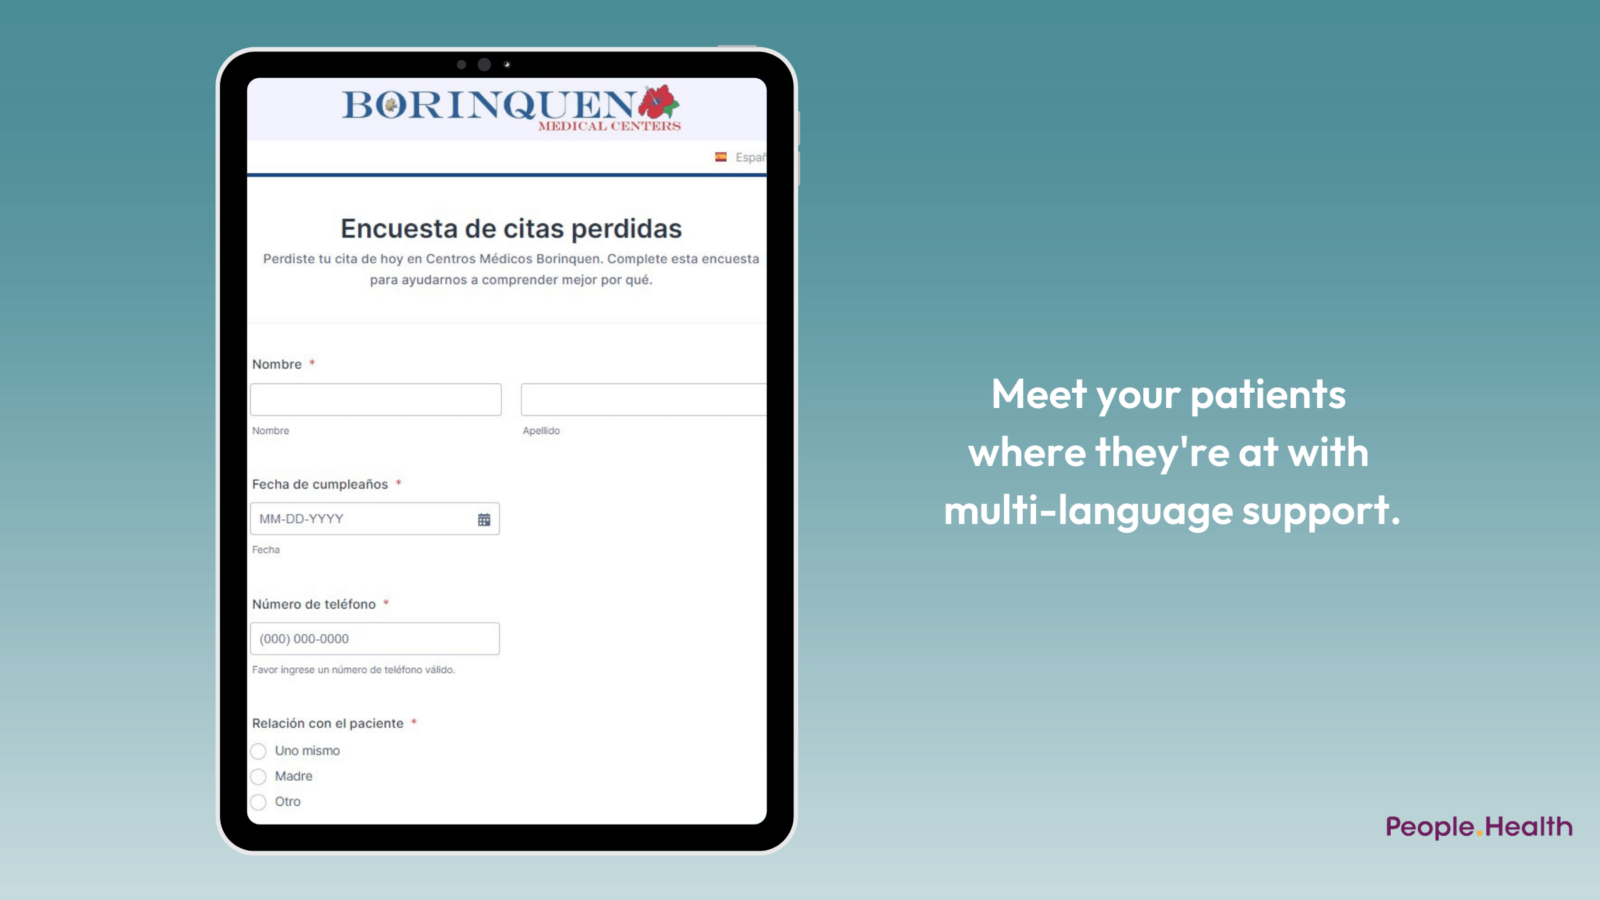 Meet your patients where they are at with multi-language support.